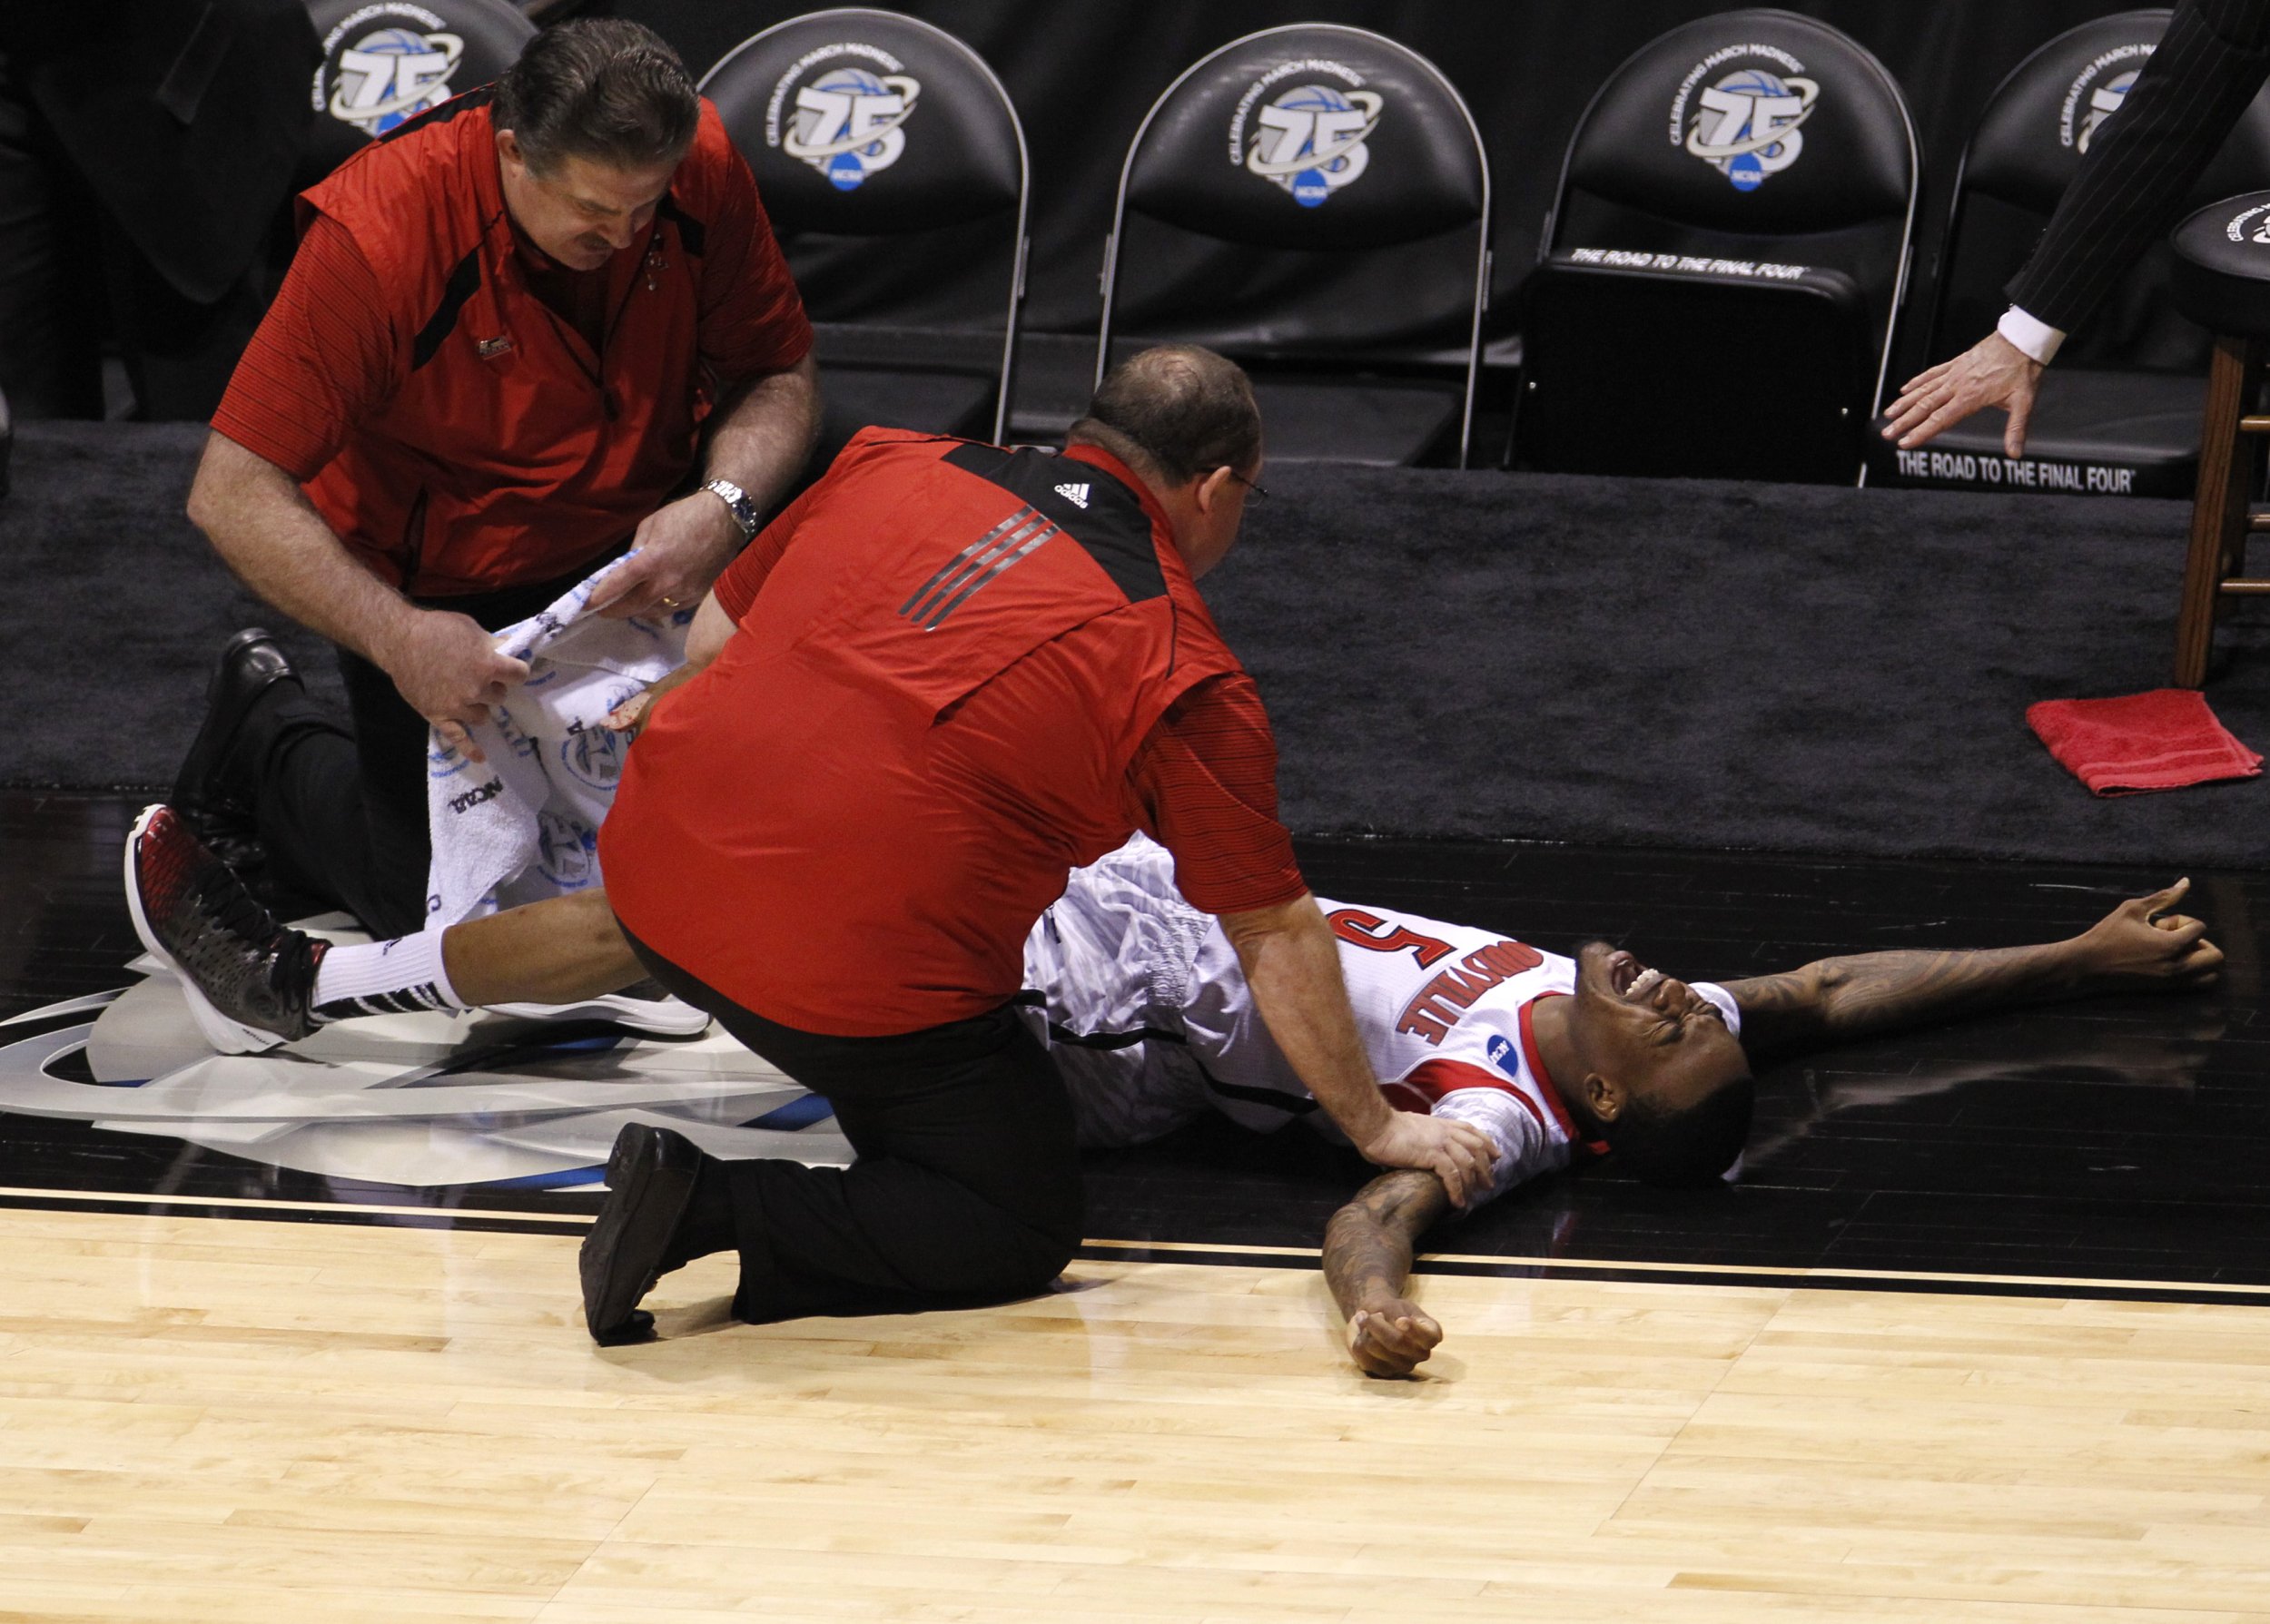 Kevin Ware Leg Injury See The Gruesome Photo Of Louisville Guard’s